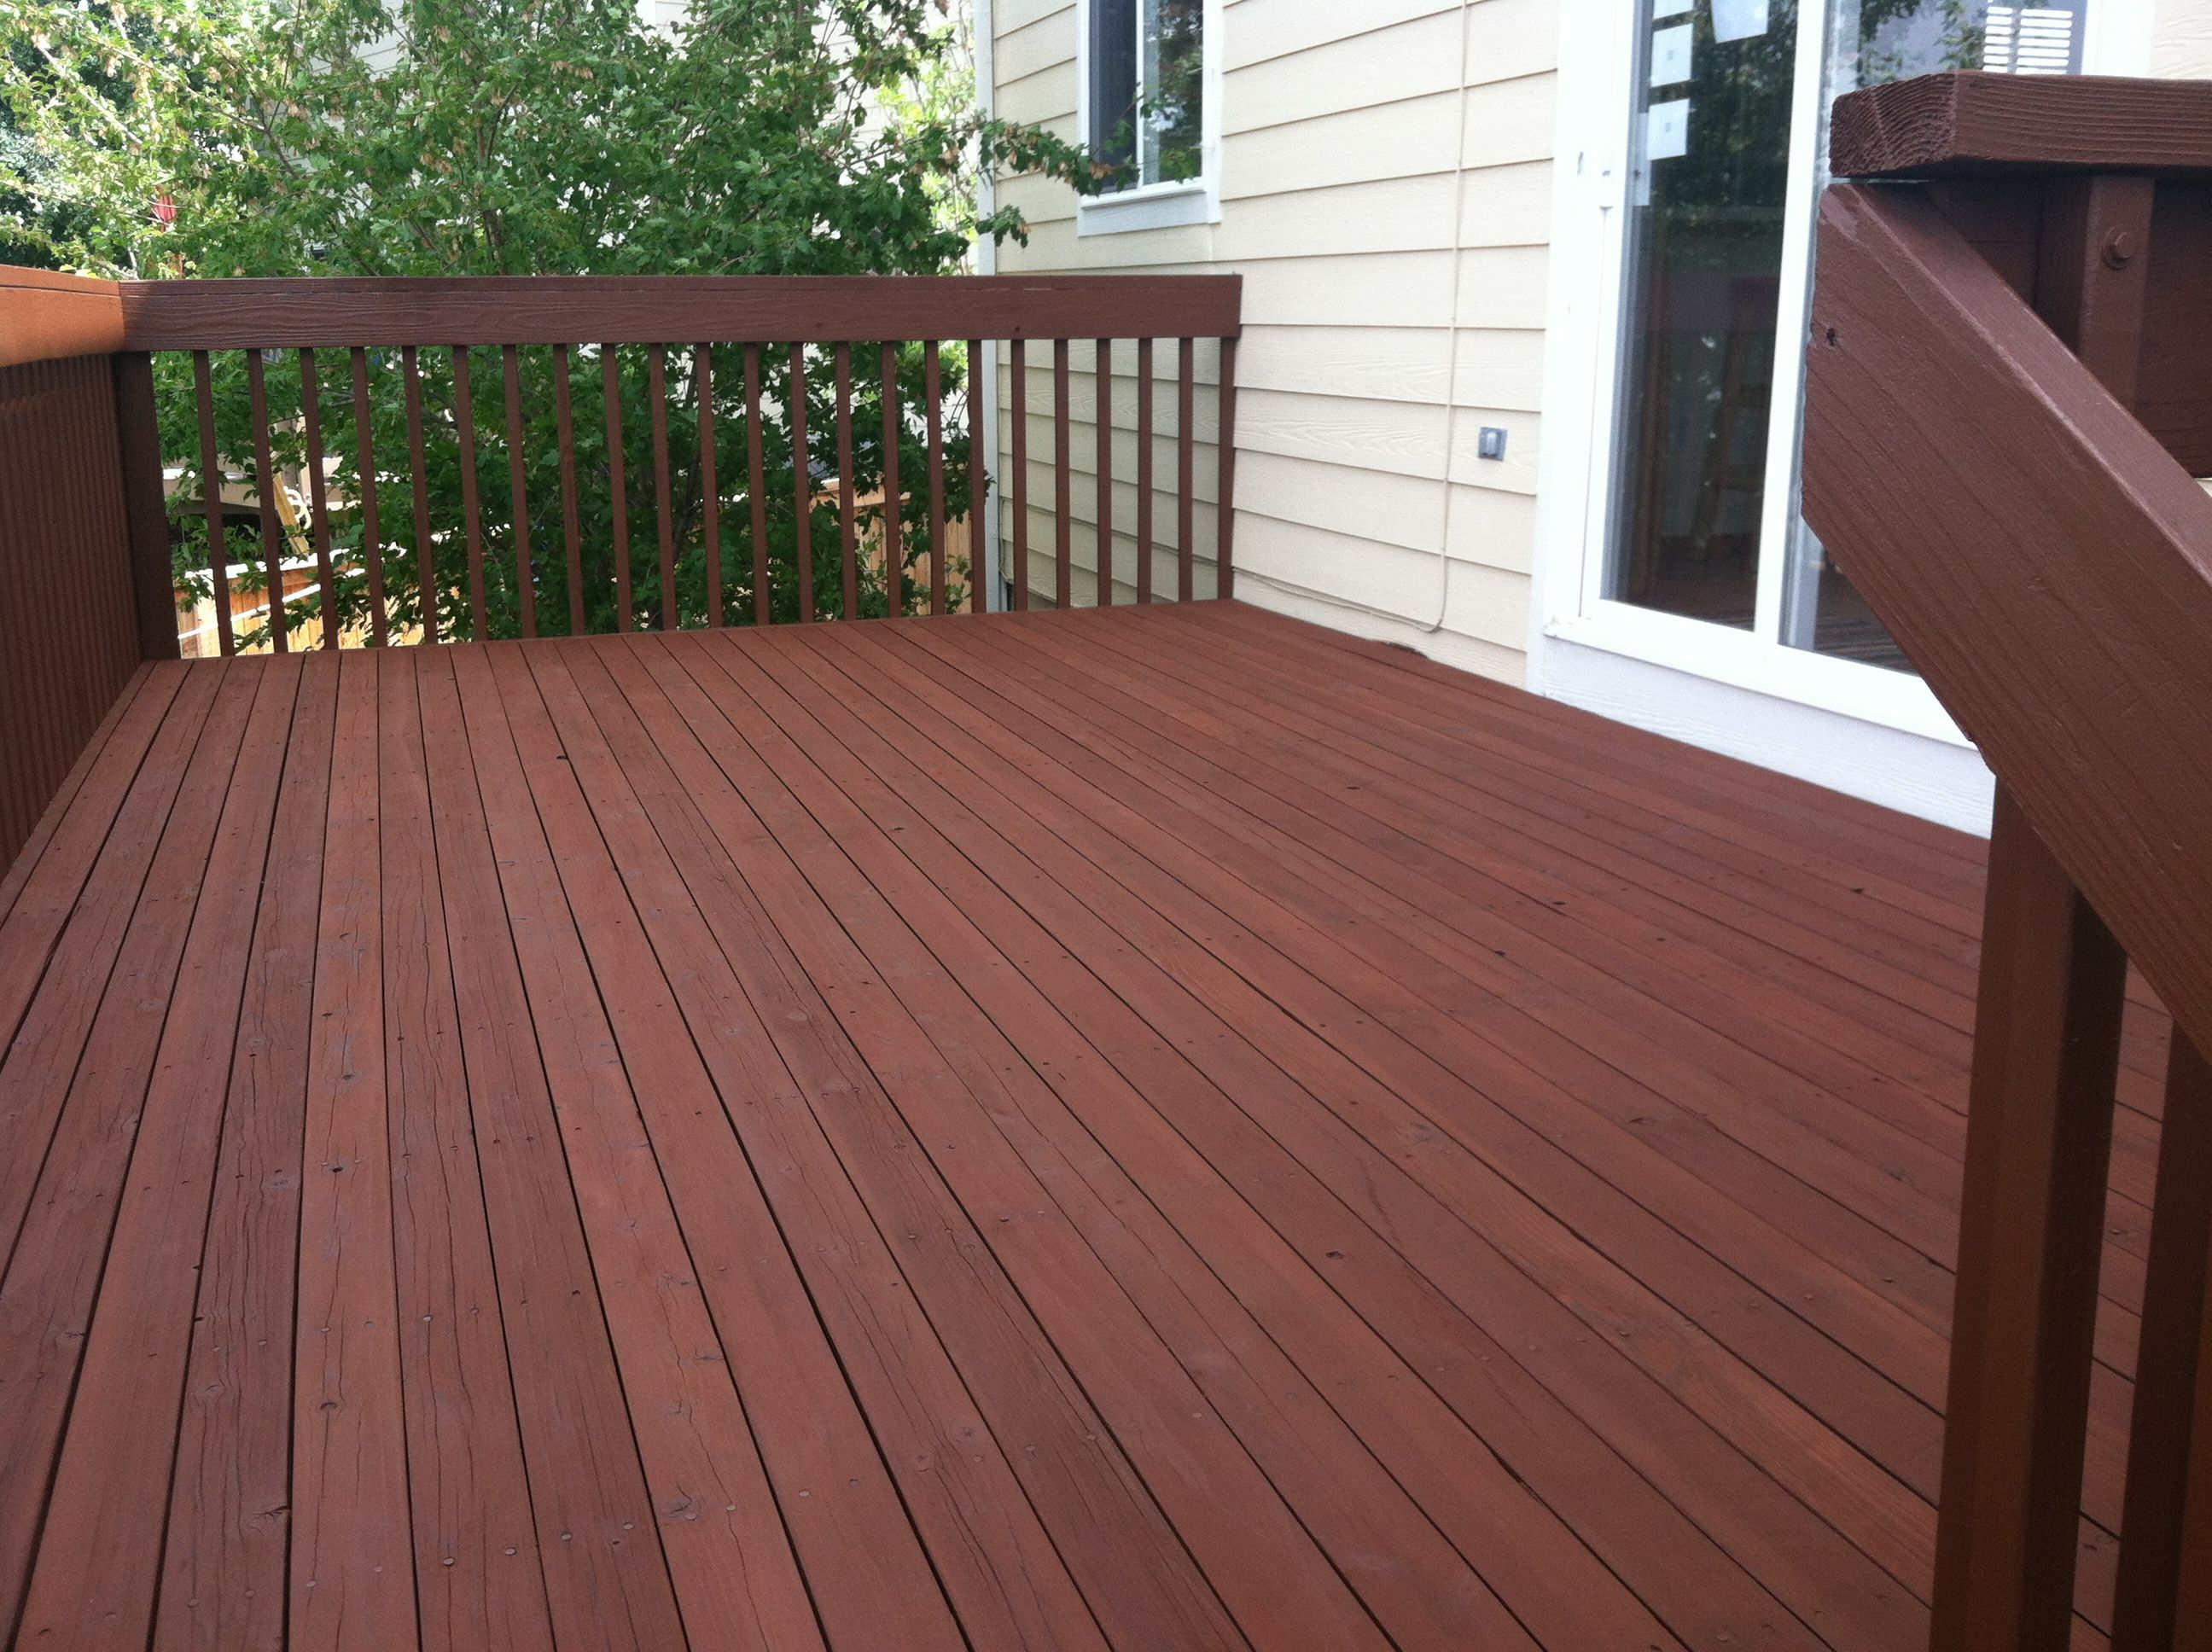 Cabot Deck Stain In Semi Solid Oak Brown Best Deck Stains In 2019 intended for proportions 2592 X 1936